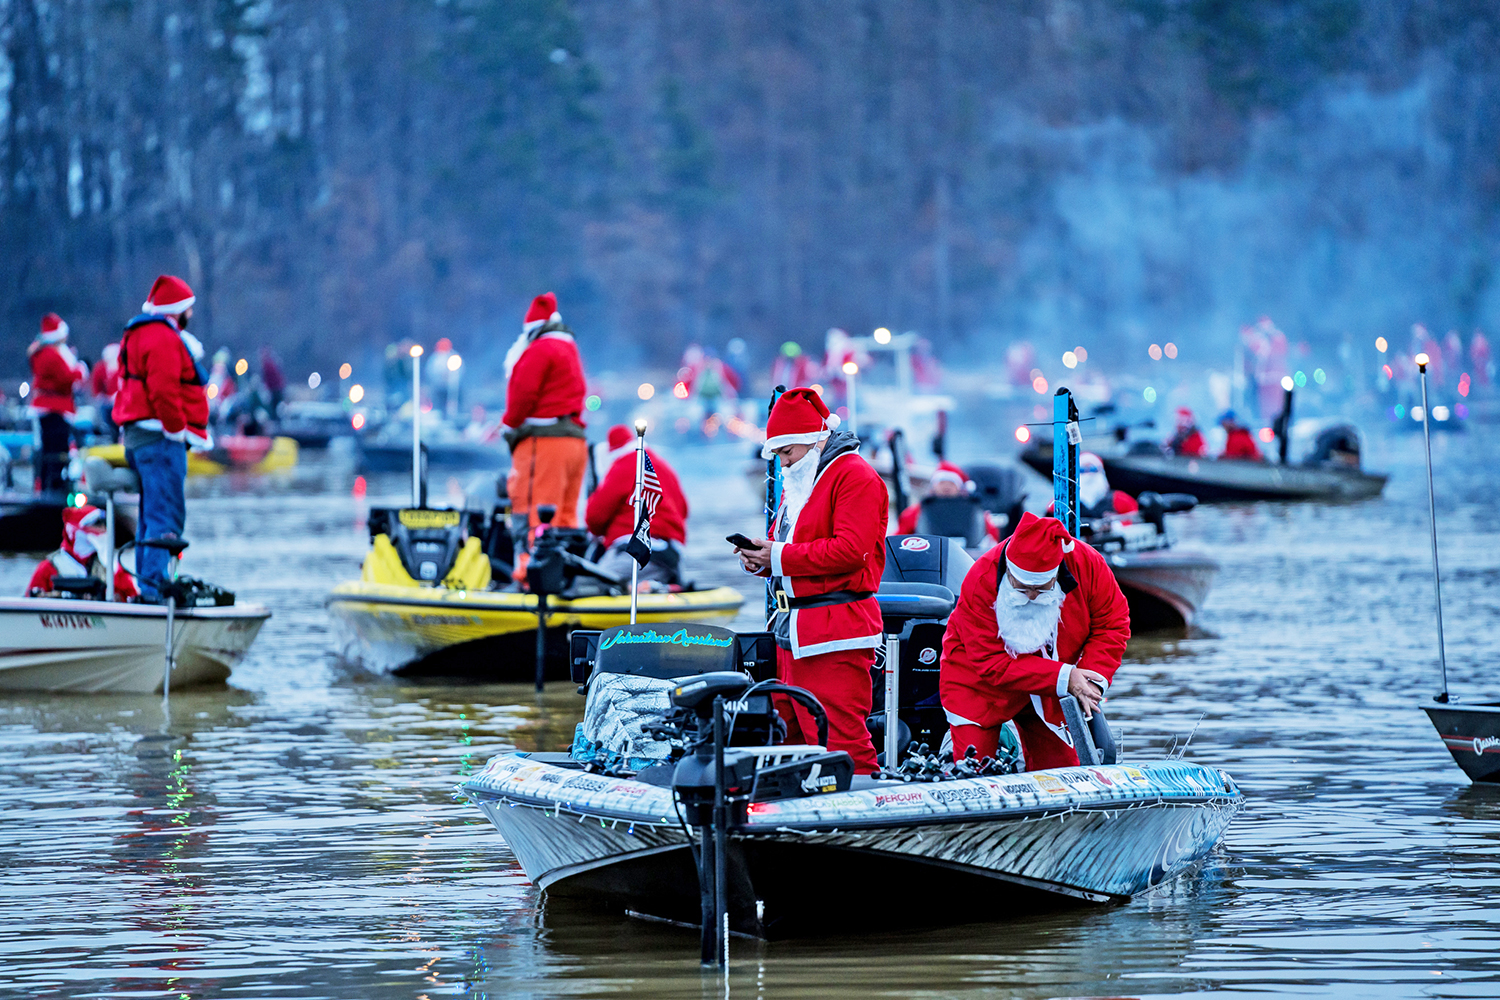 World's Largest Santa Claus Bass Tournament Raises More Than $15K For Charity